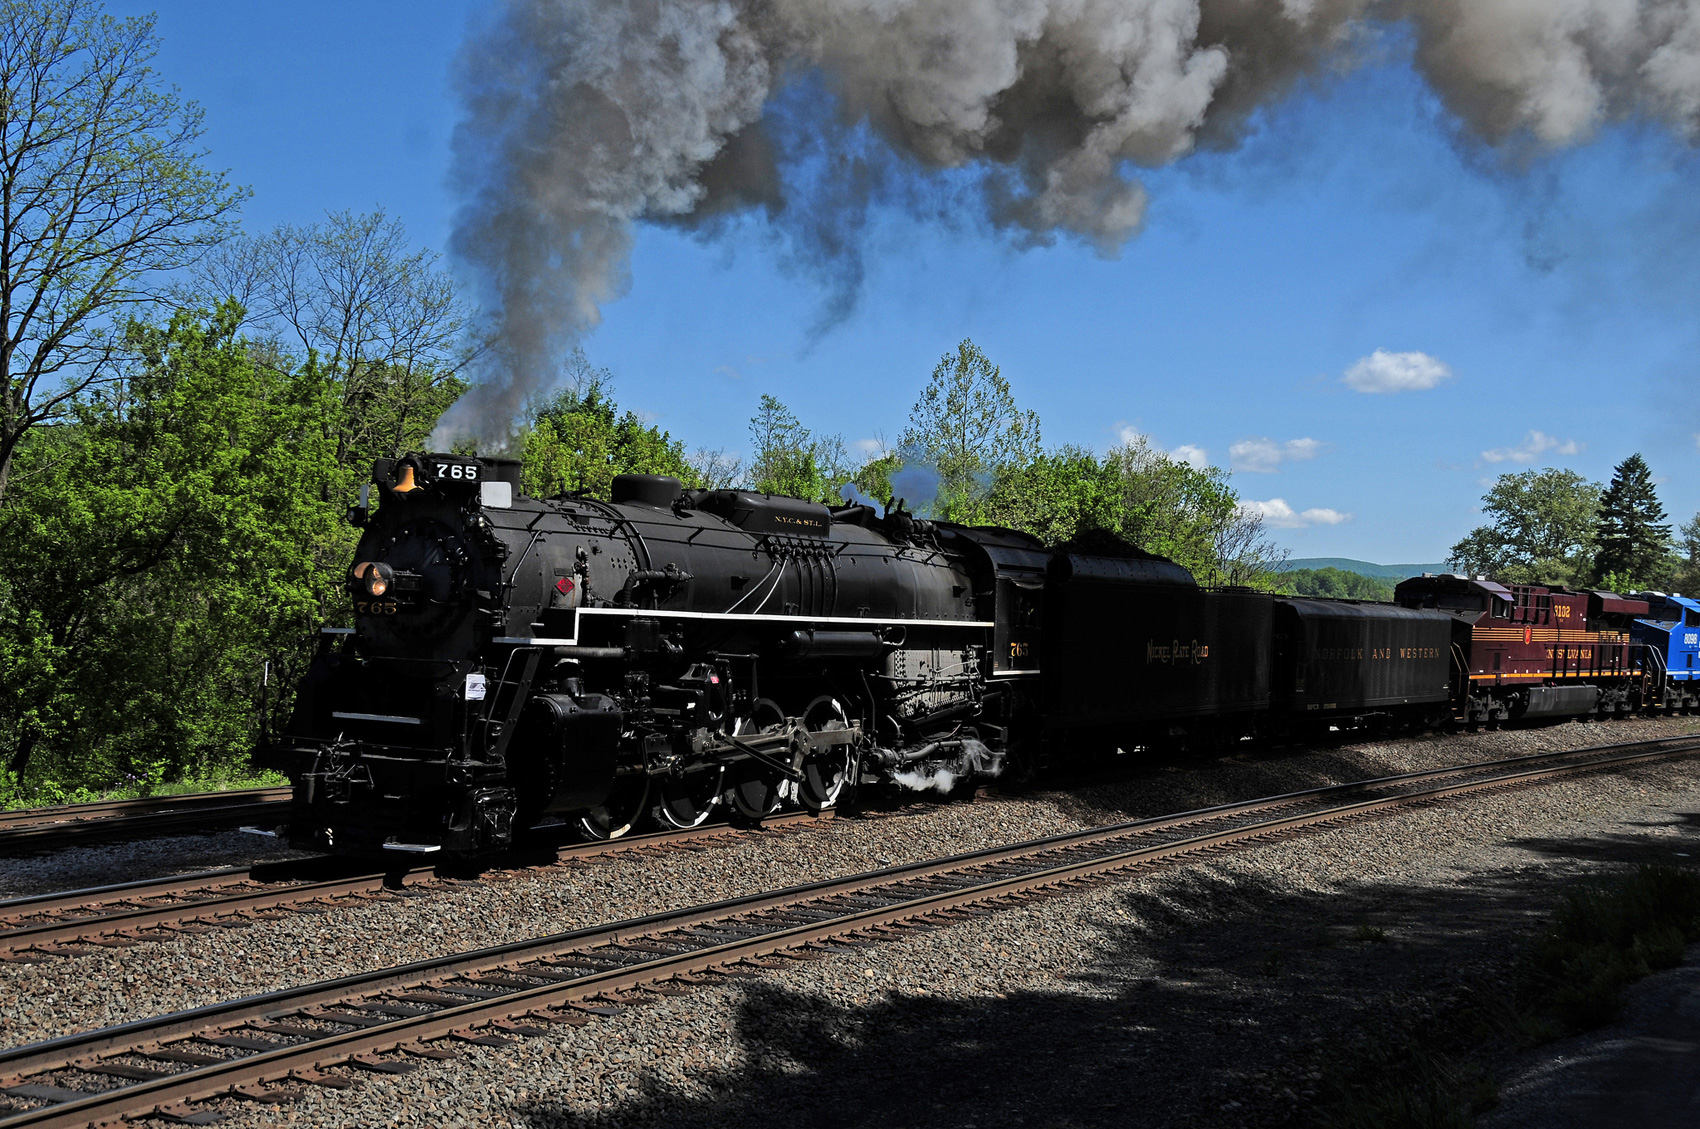 Nickel Plate Road #765: Whistle, Schedule, Excursions